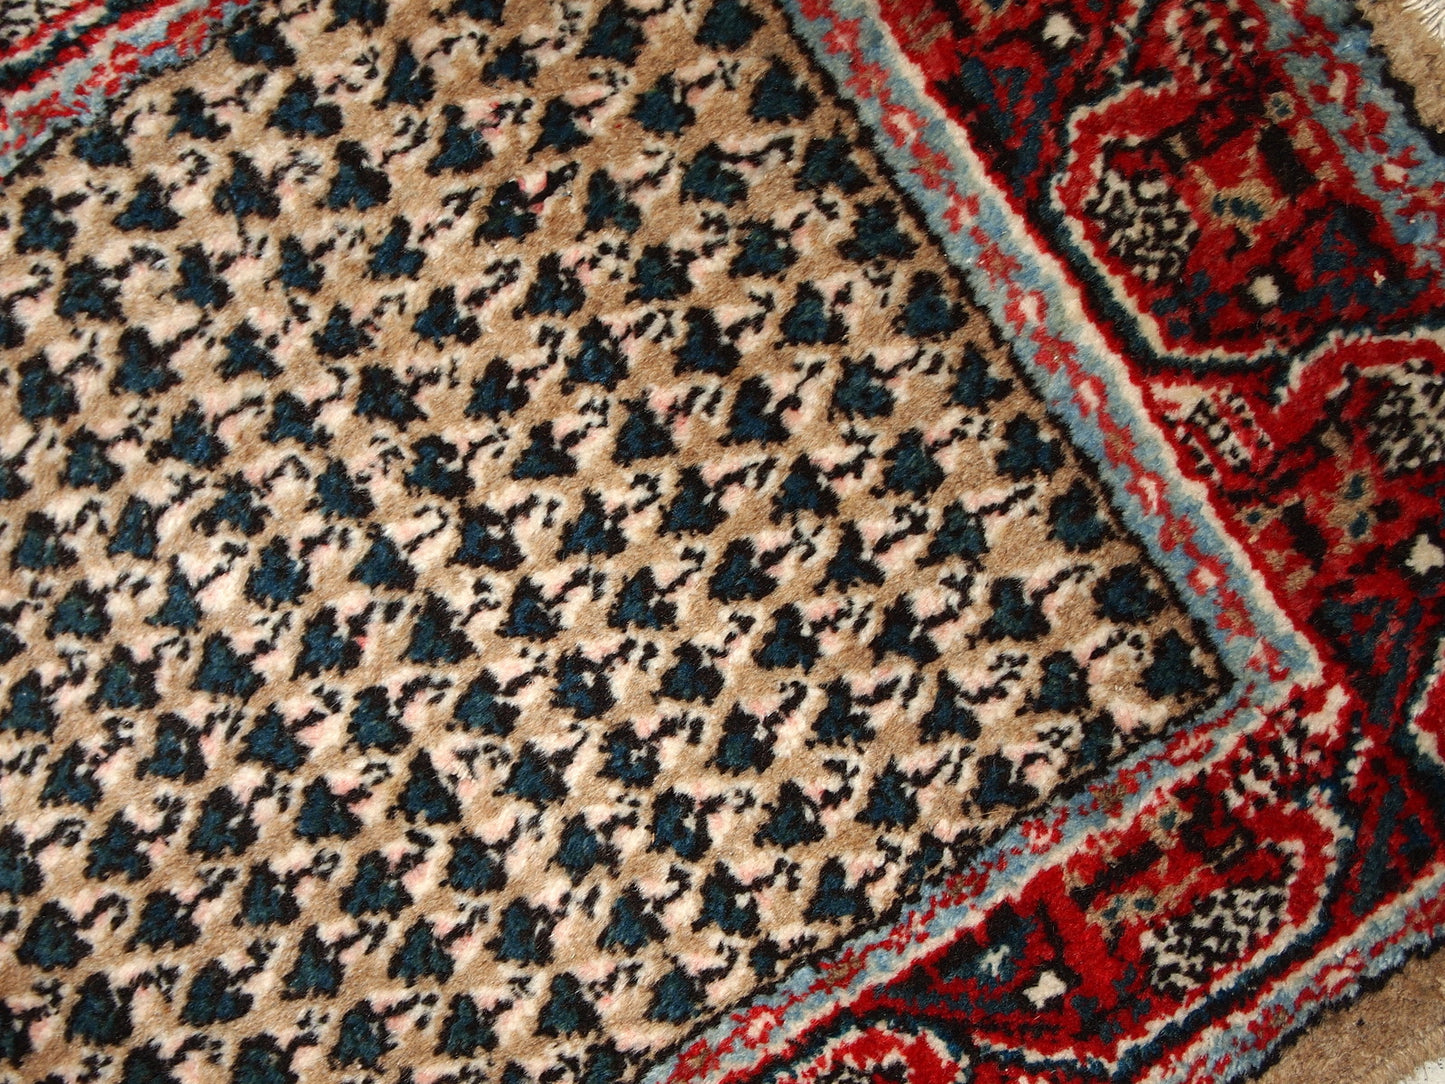 Handmade vintage Indian rug with Middle Eastern Seraband design. The rug is made in the end of 20th century, it is in original good condition.